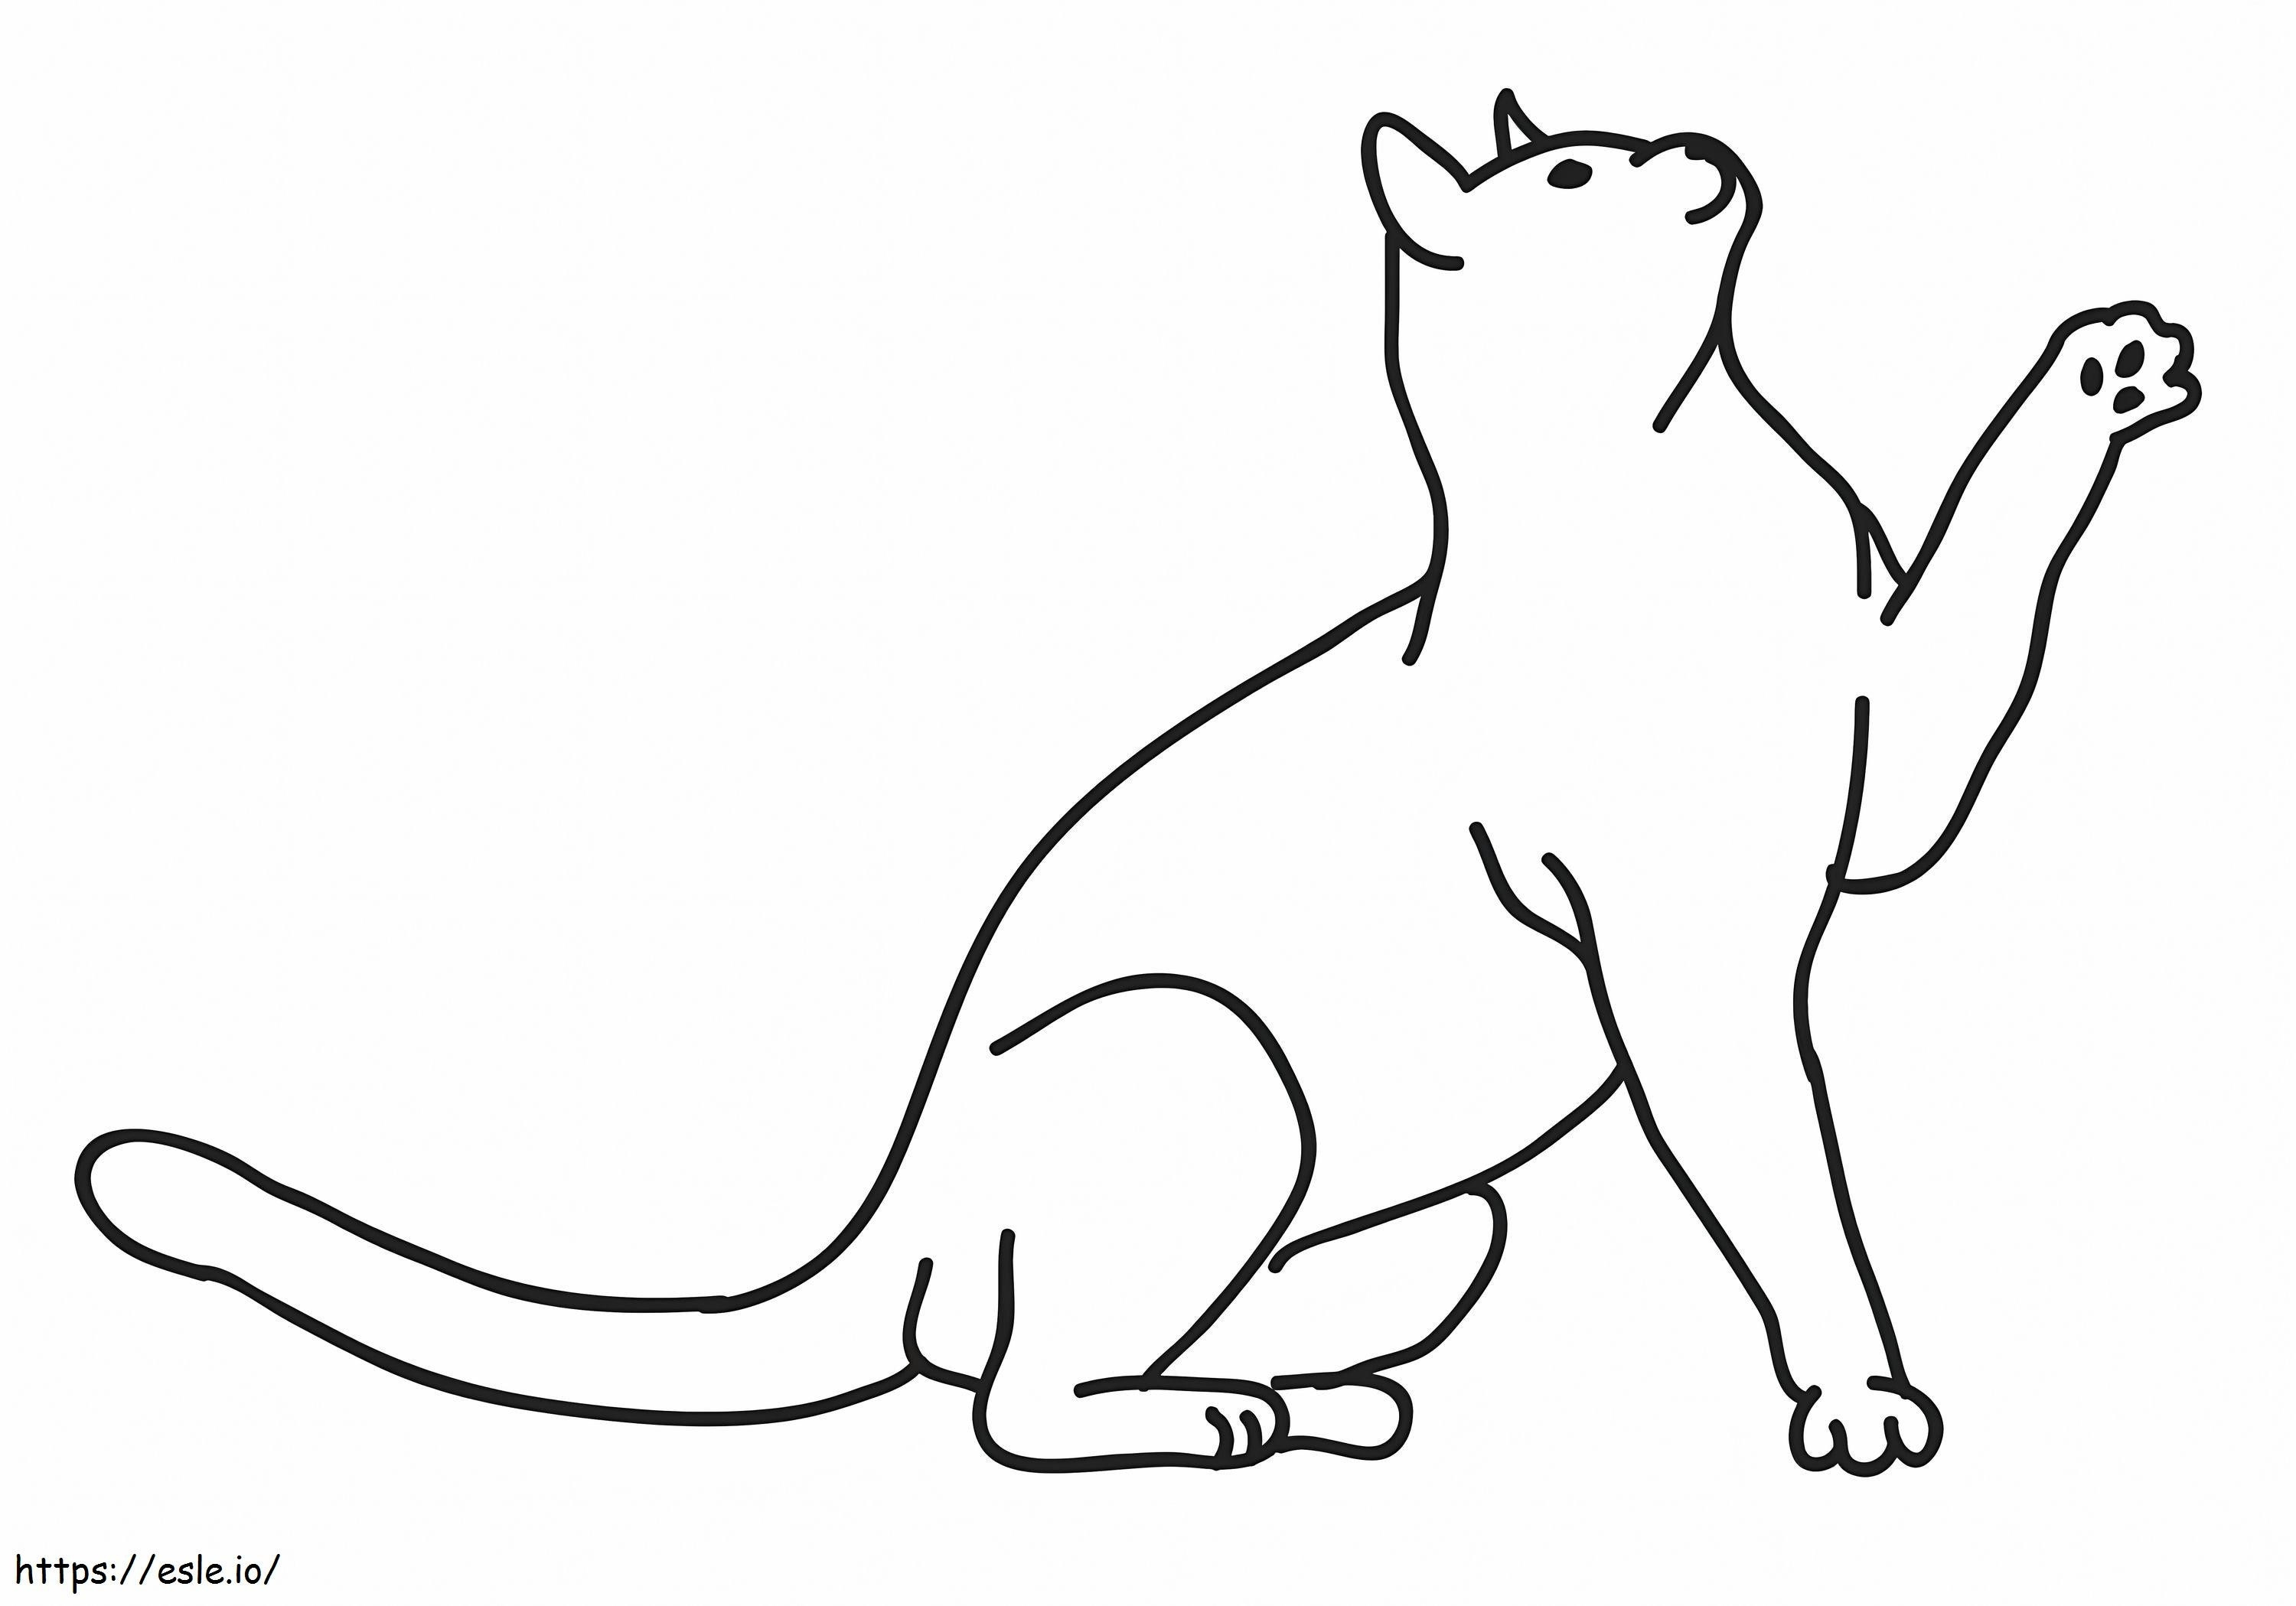 A Cat 1 coloring page